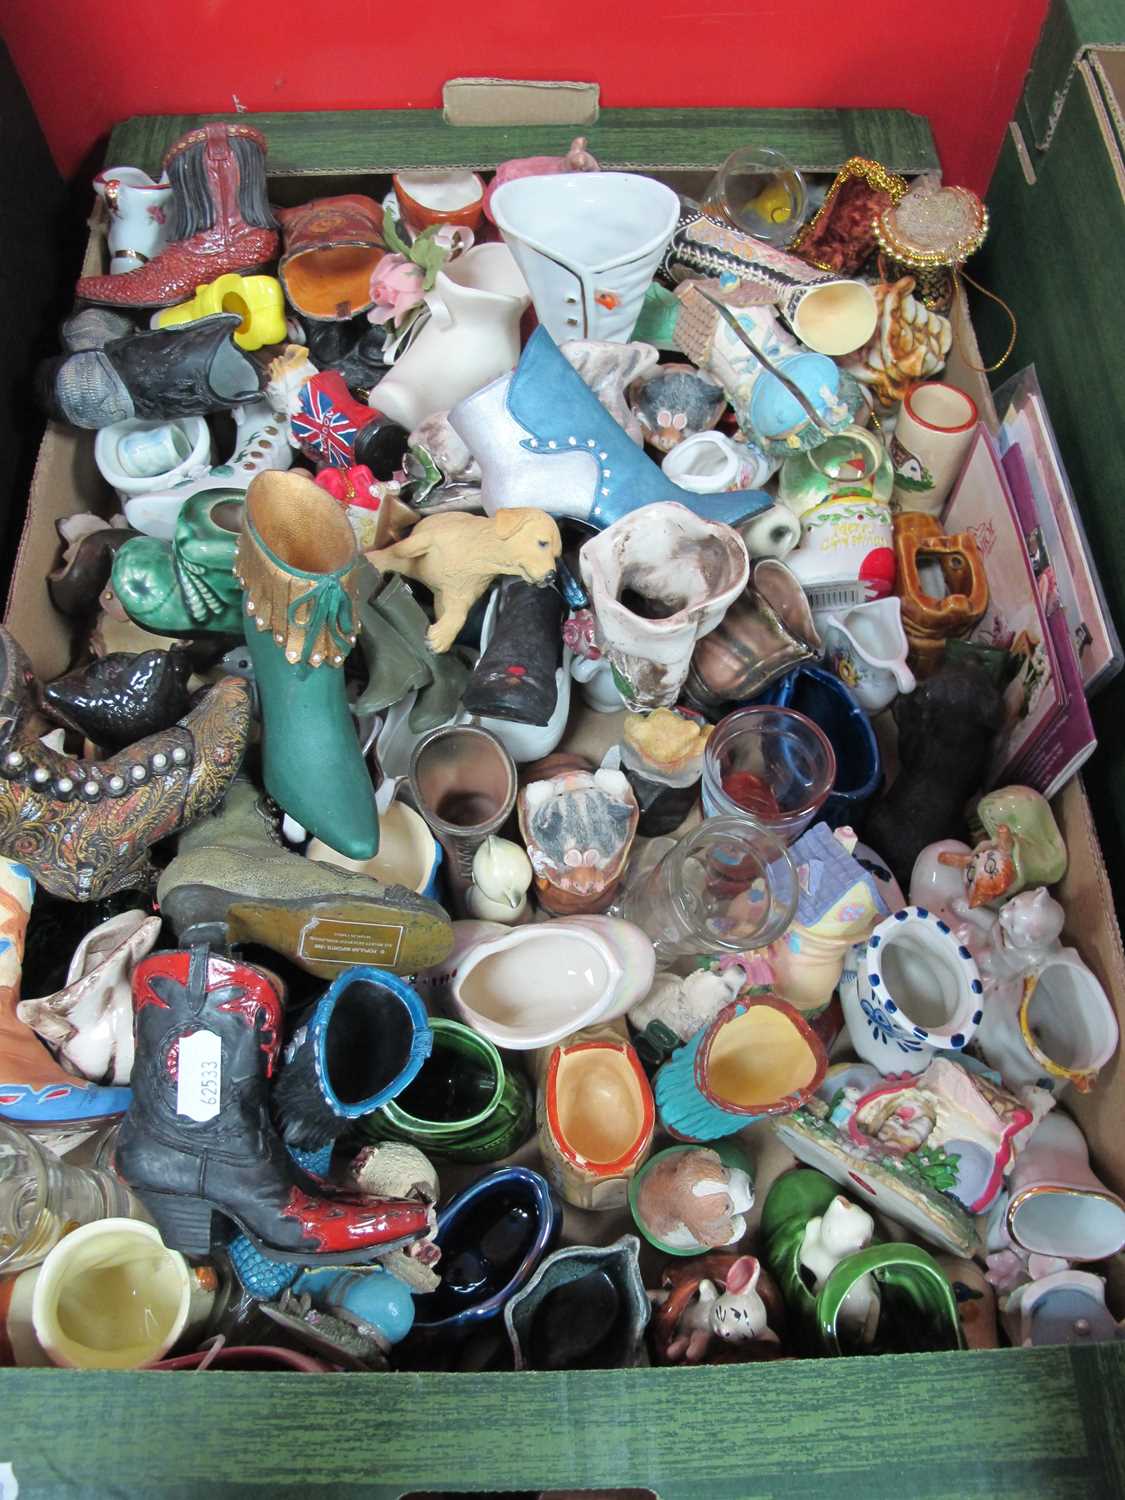 Collection of Miniature Novelty Shoes - Just The Right Shoe, Cowboy boots, etc:- One Box